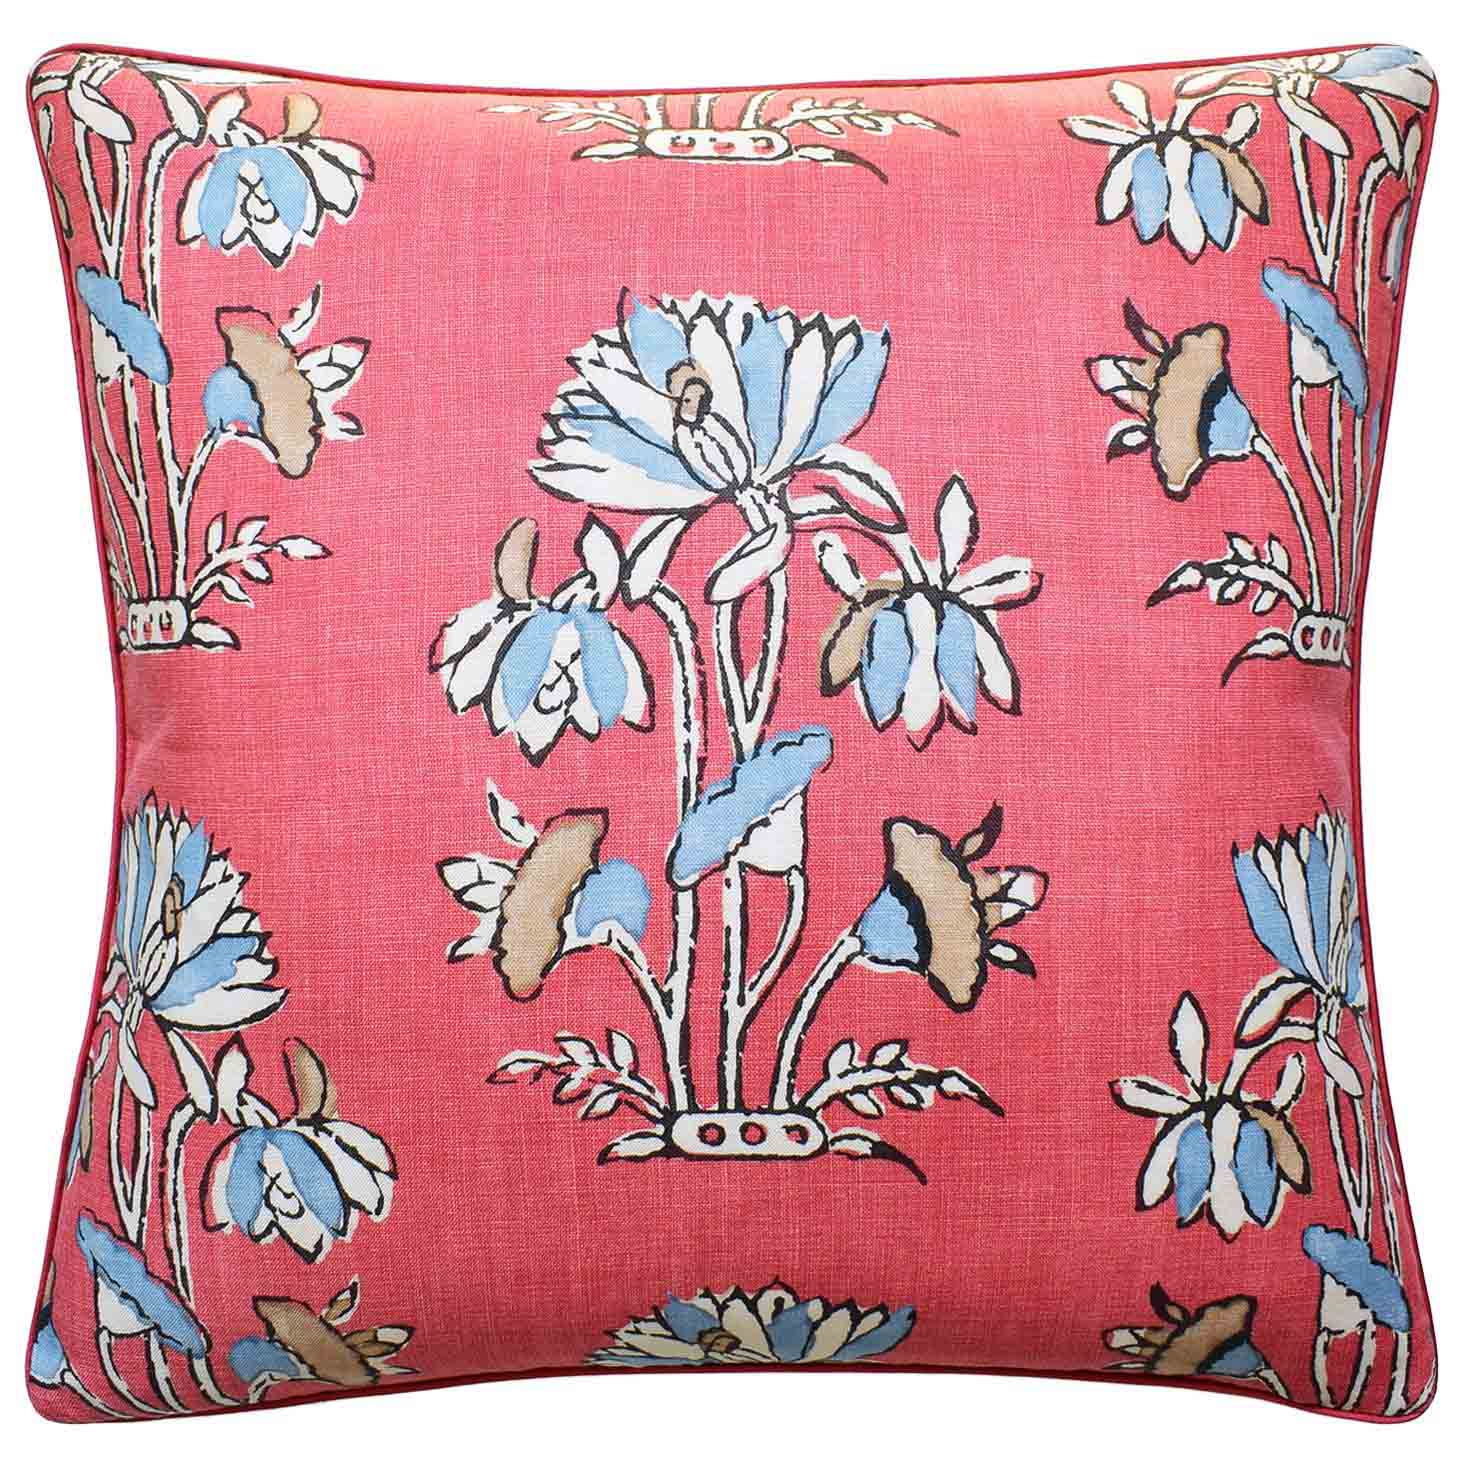 Coral Lily Pillow-$385.00